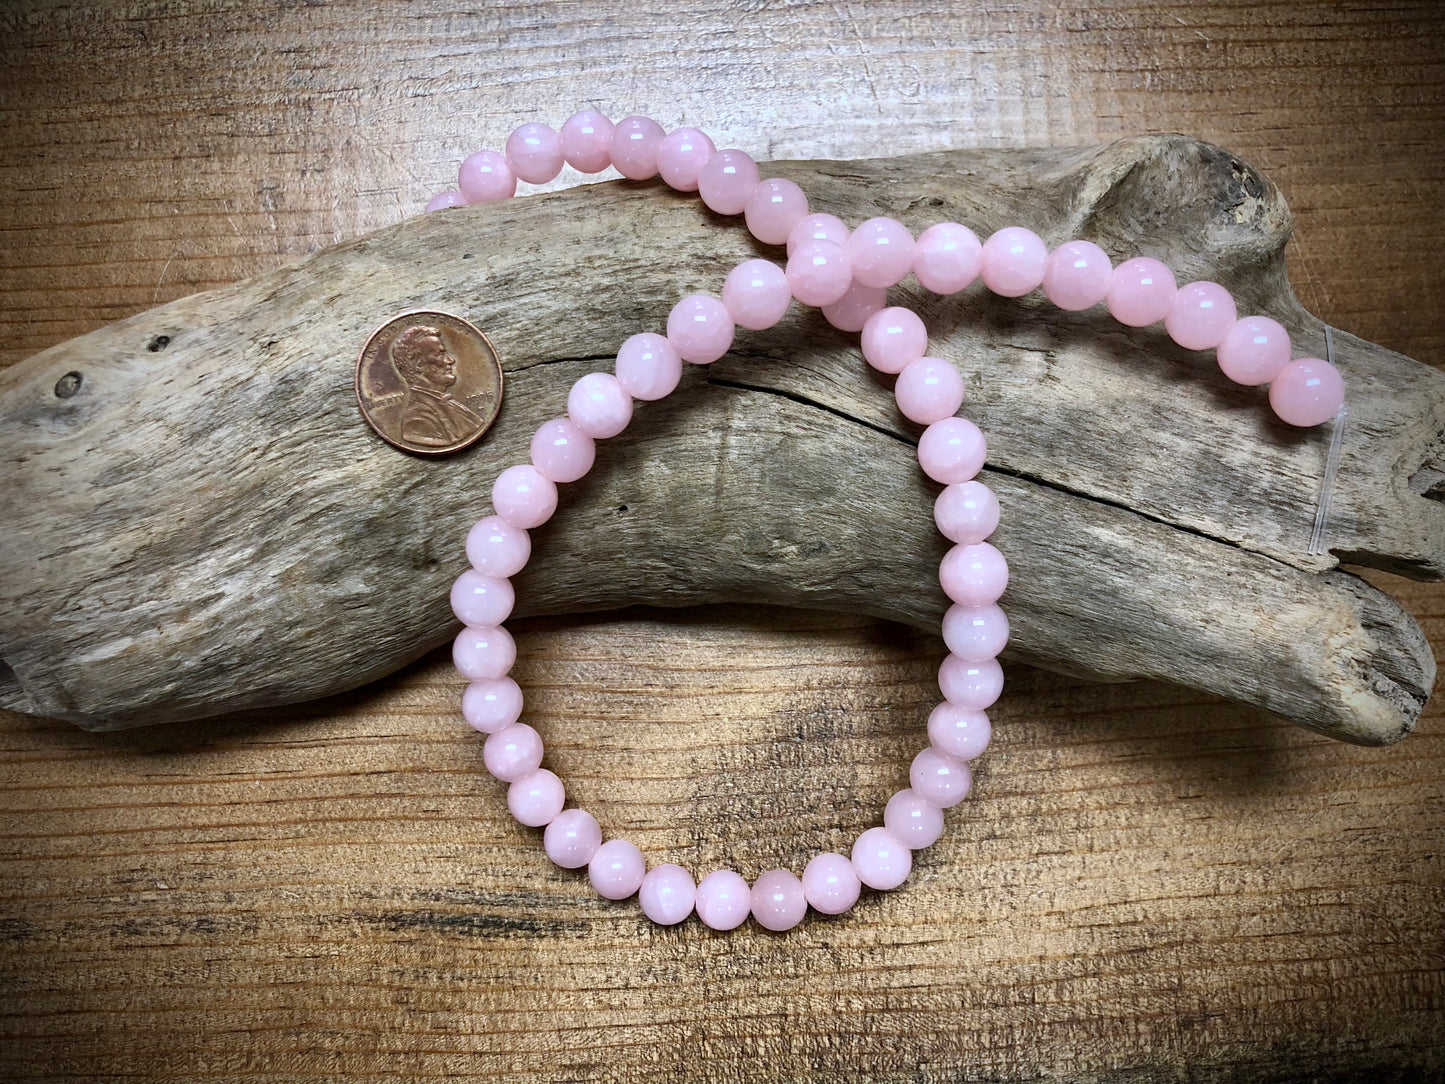 Dyed Jade Smooth Rounds - Light Pink - 8mm - 15.5"